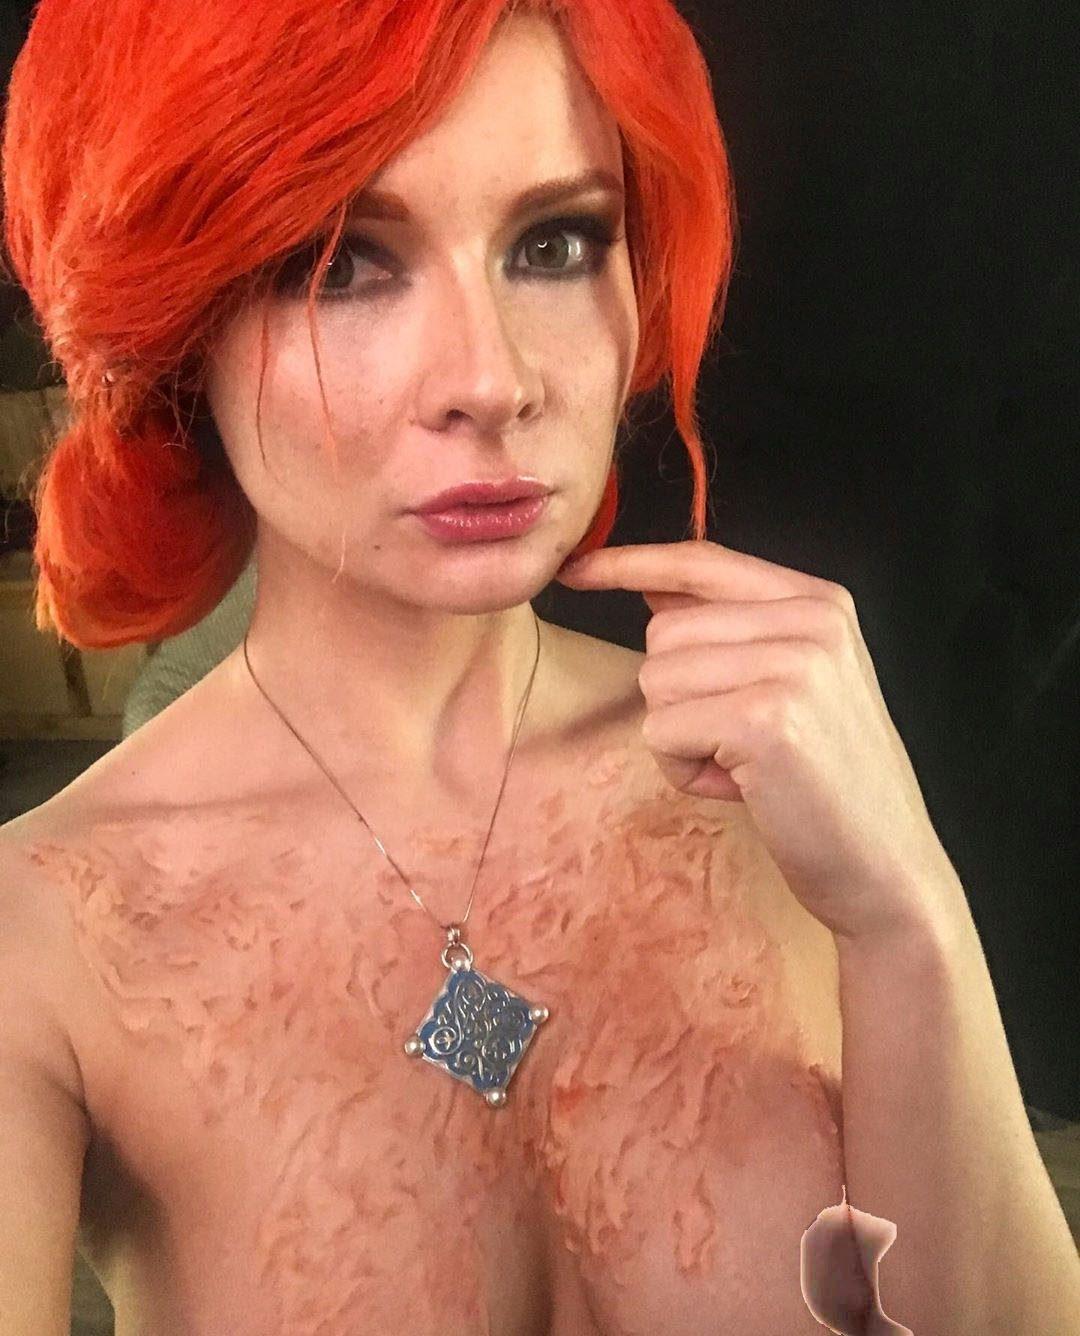 Jannet Incosplay Nude